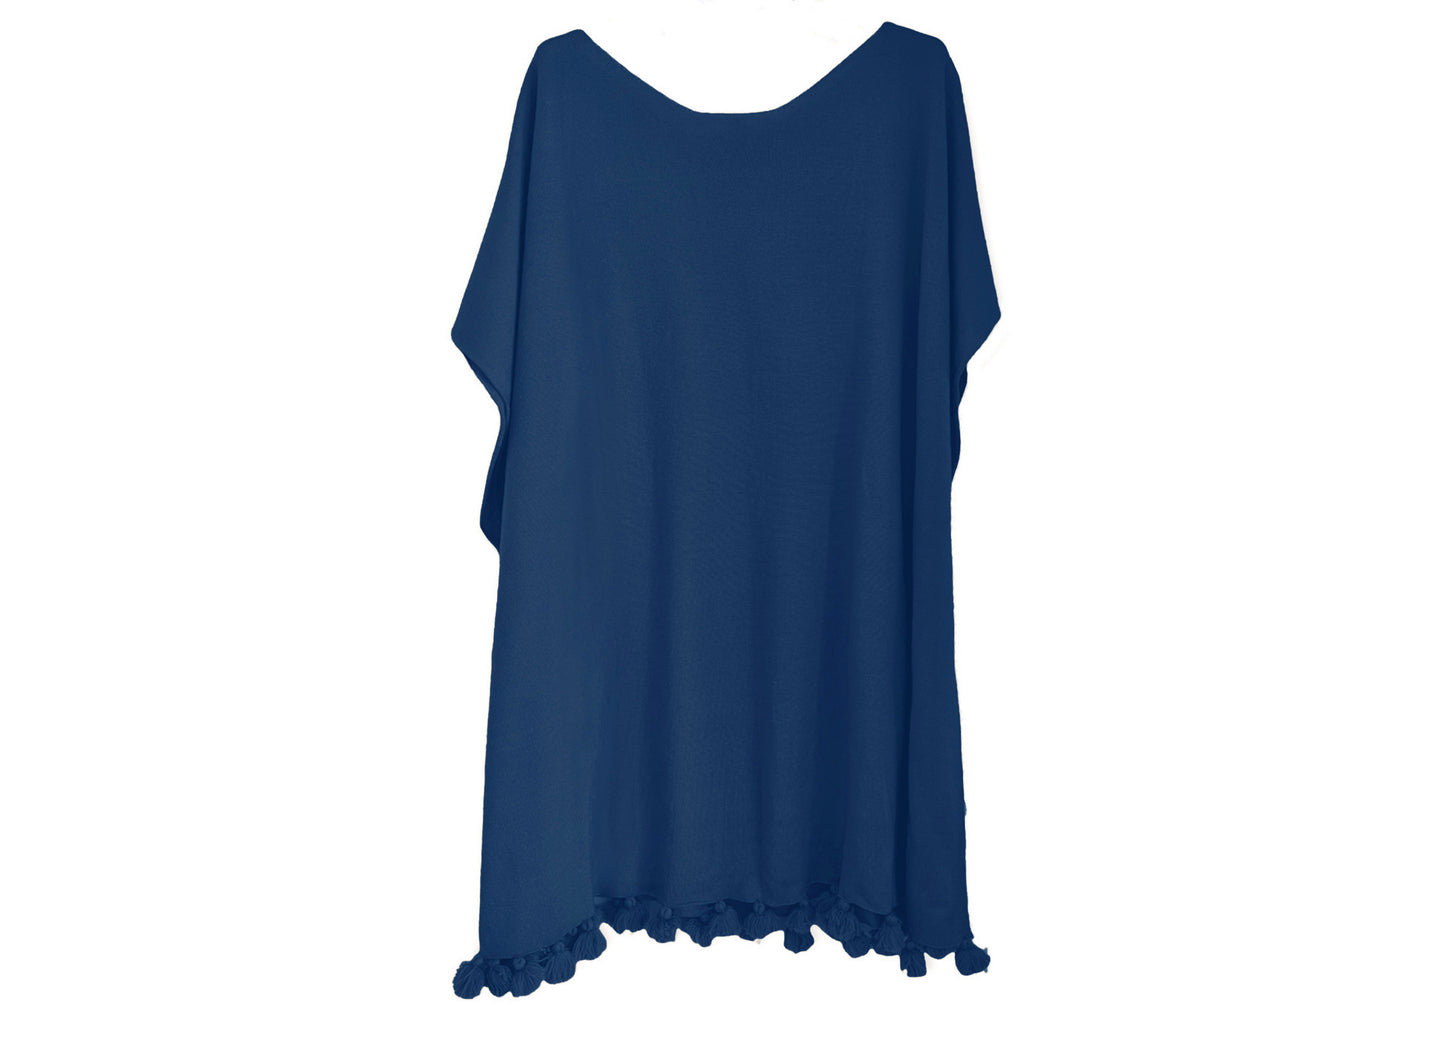 Resort cashmere Silk poncho cover up tassels navy